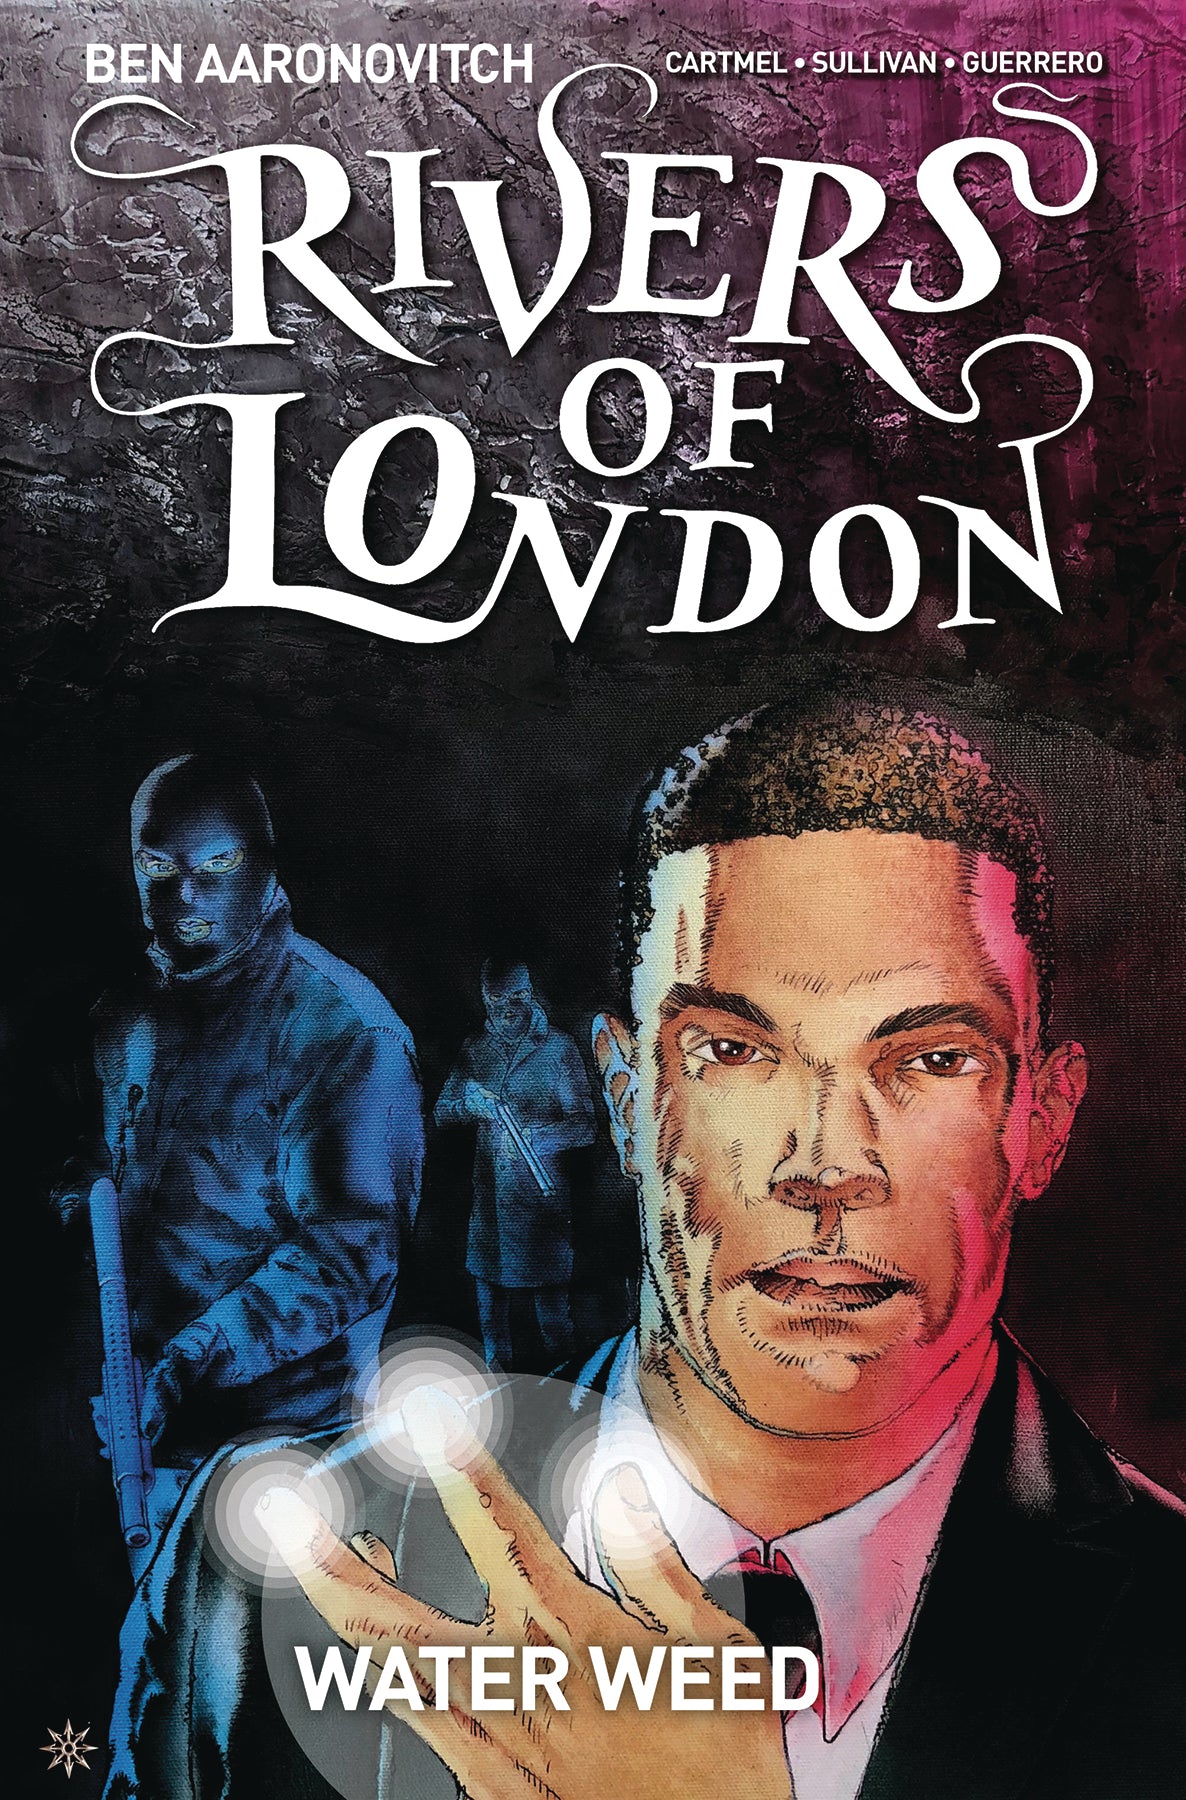 RIVERS OF LONDON WATER WEED #3 COVER